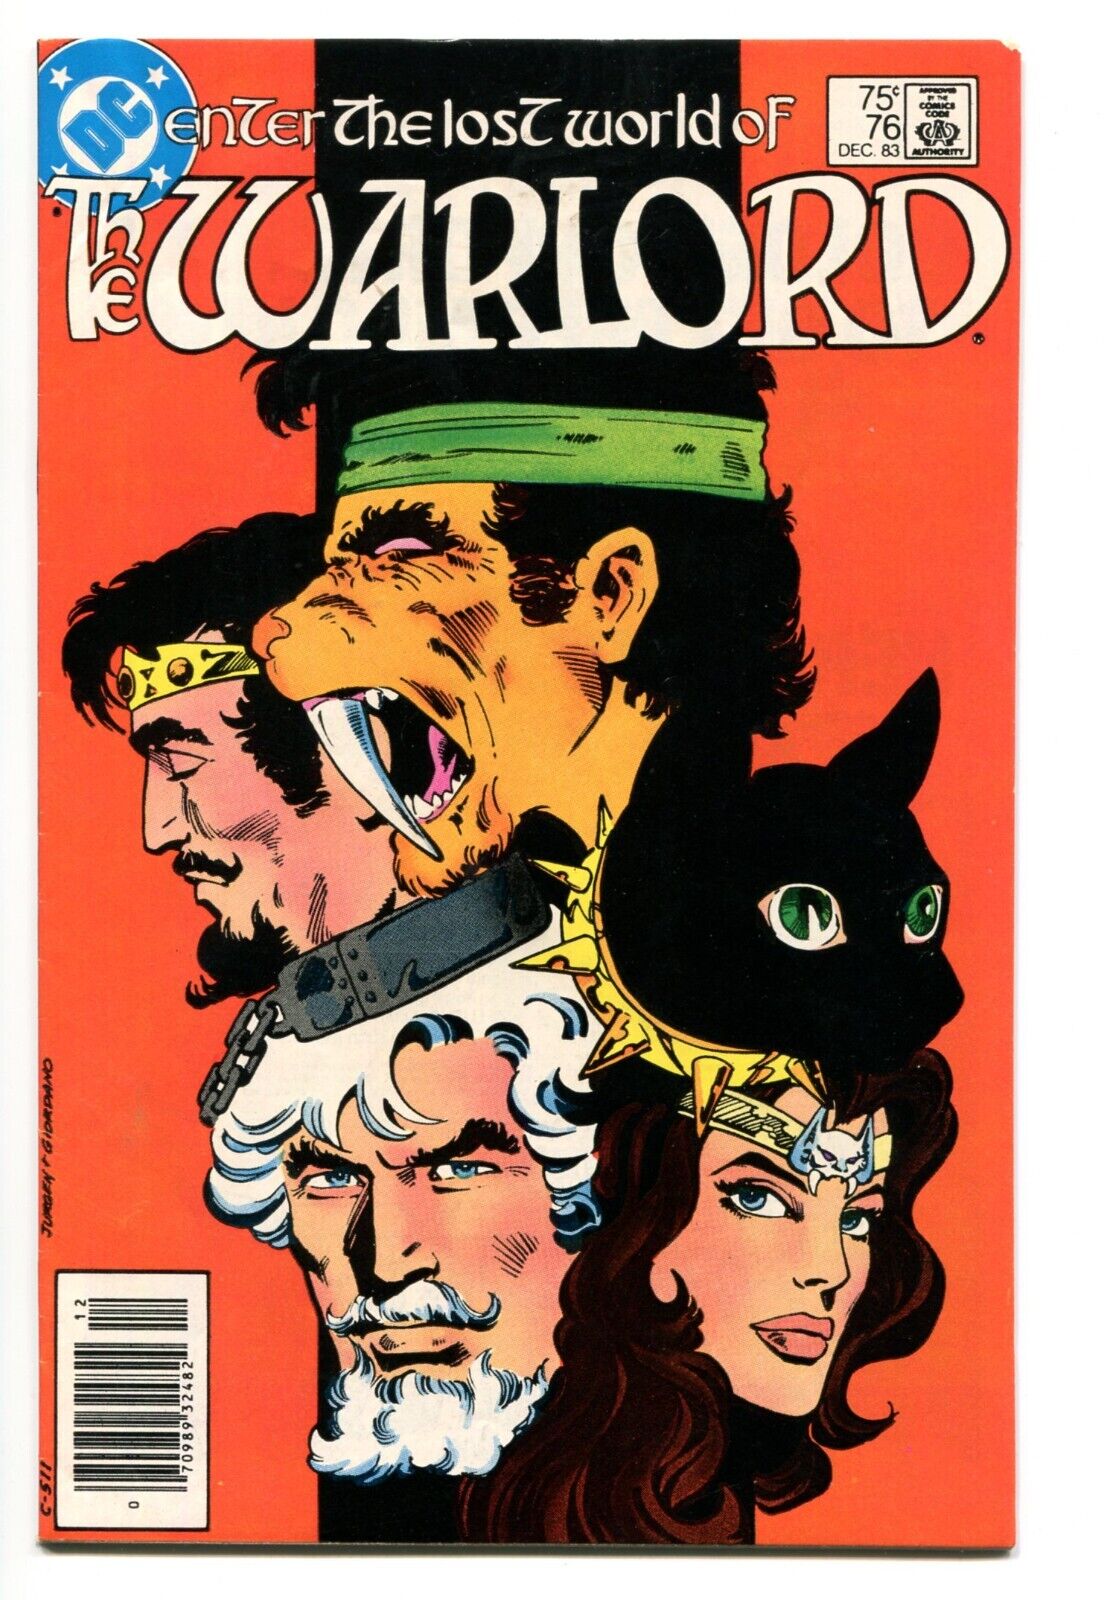 WARLORD, Issue #76, (DC 1976), VG/FN